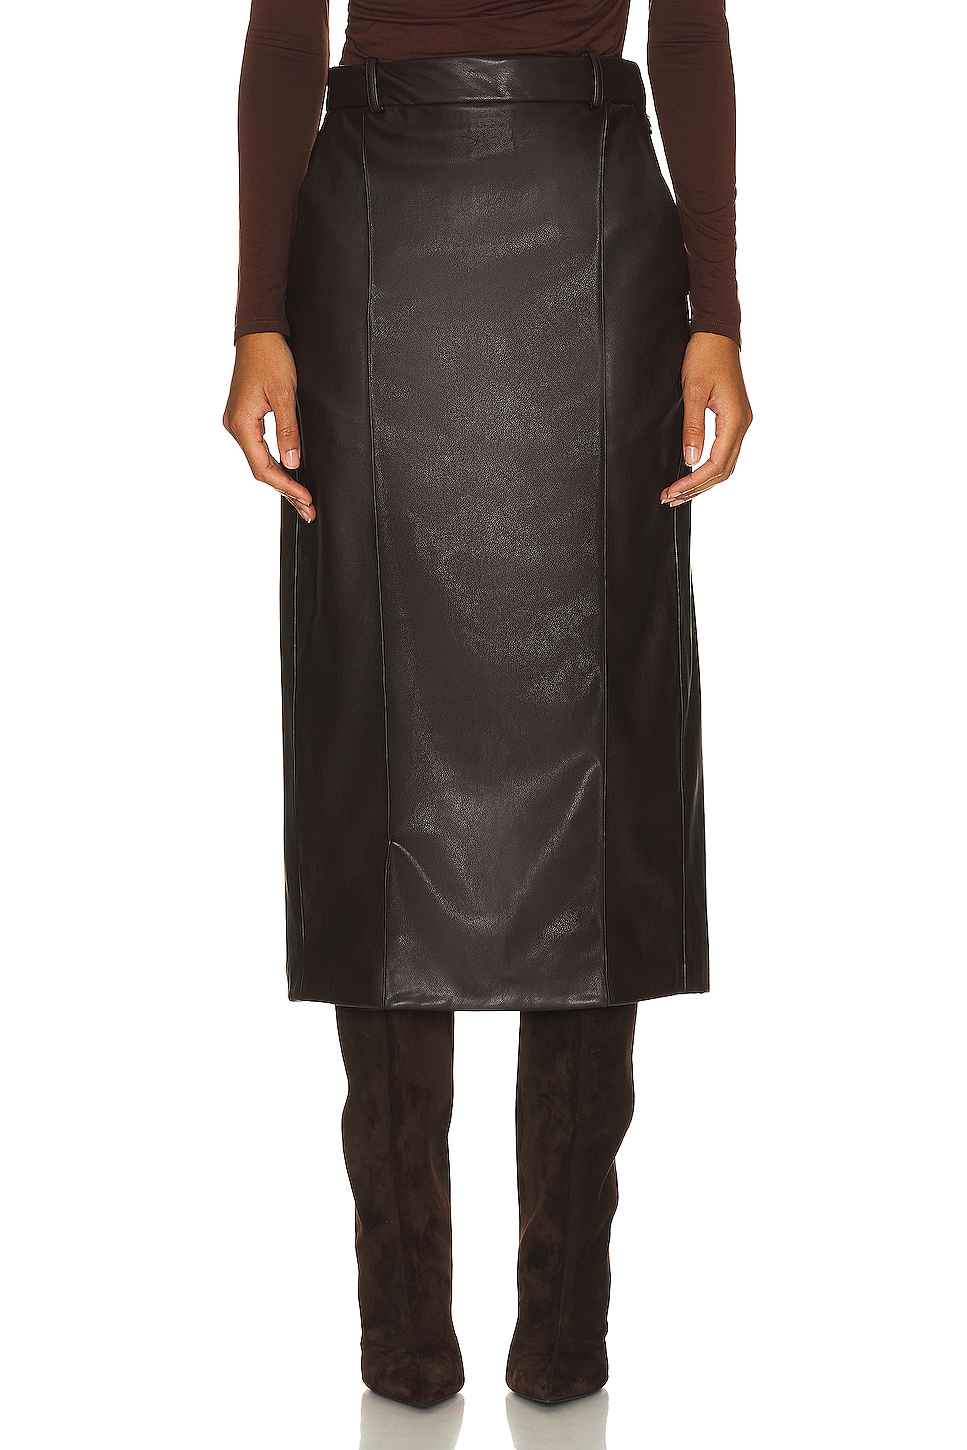 Image 1 of Enza Costa Soft Leather Trouser Skirt in Espresso